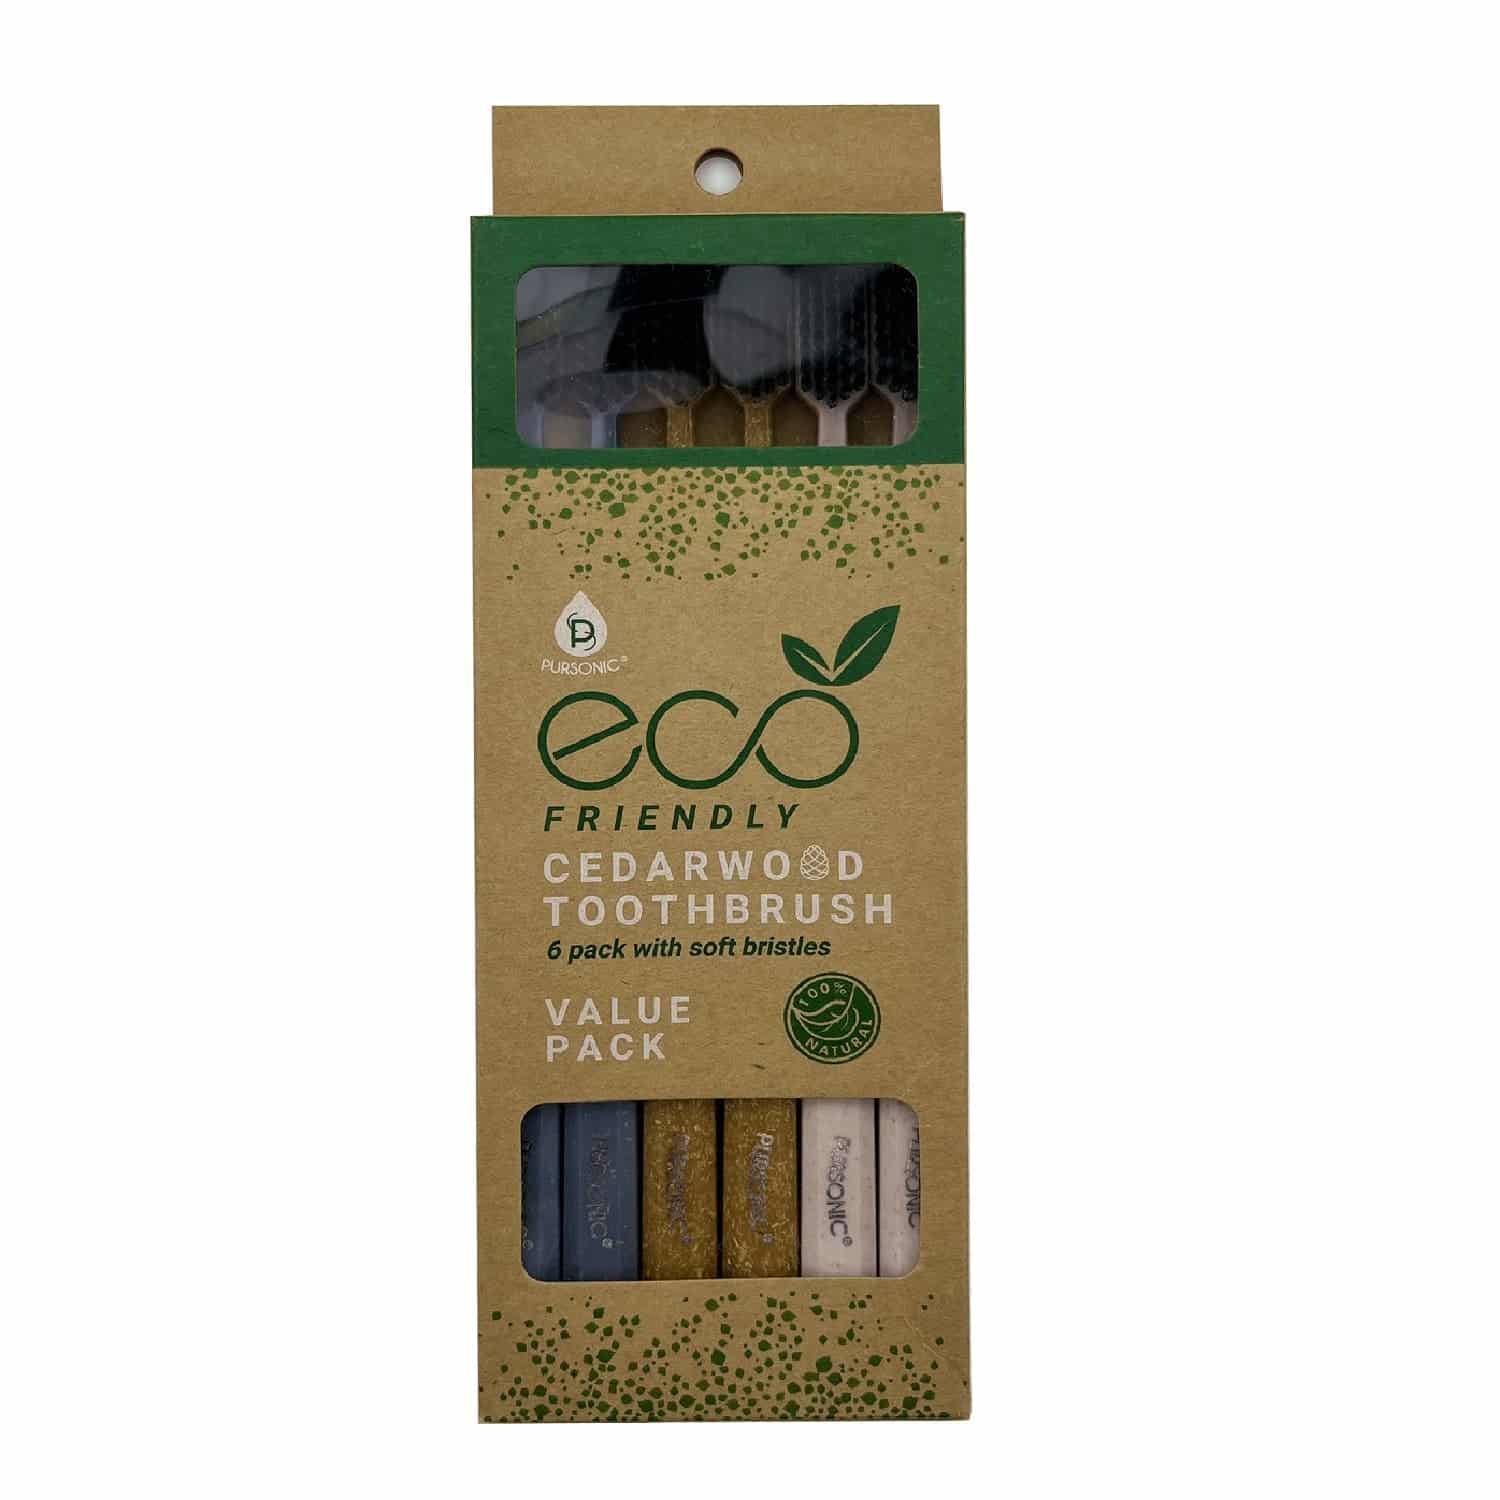 Pursonic Eco-friendly Cedarwood Toothbrushes (6 Pack)